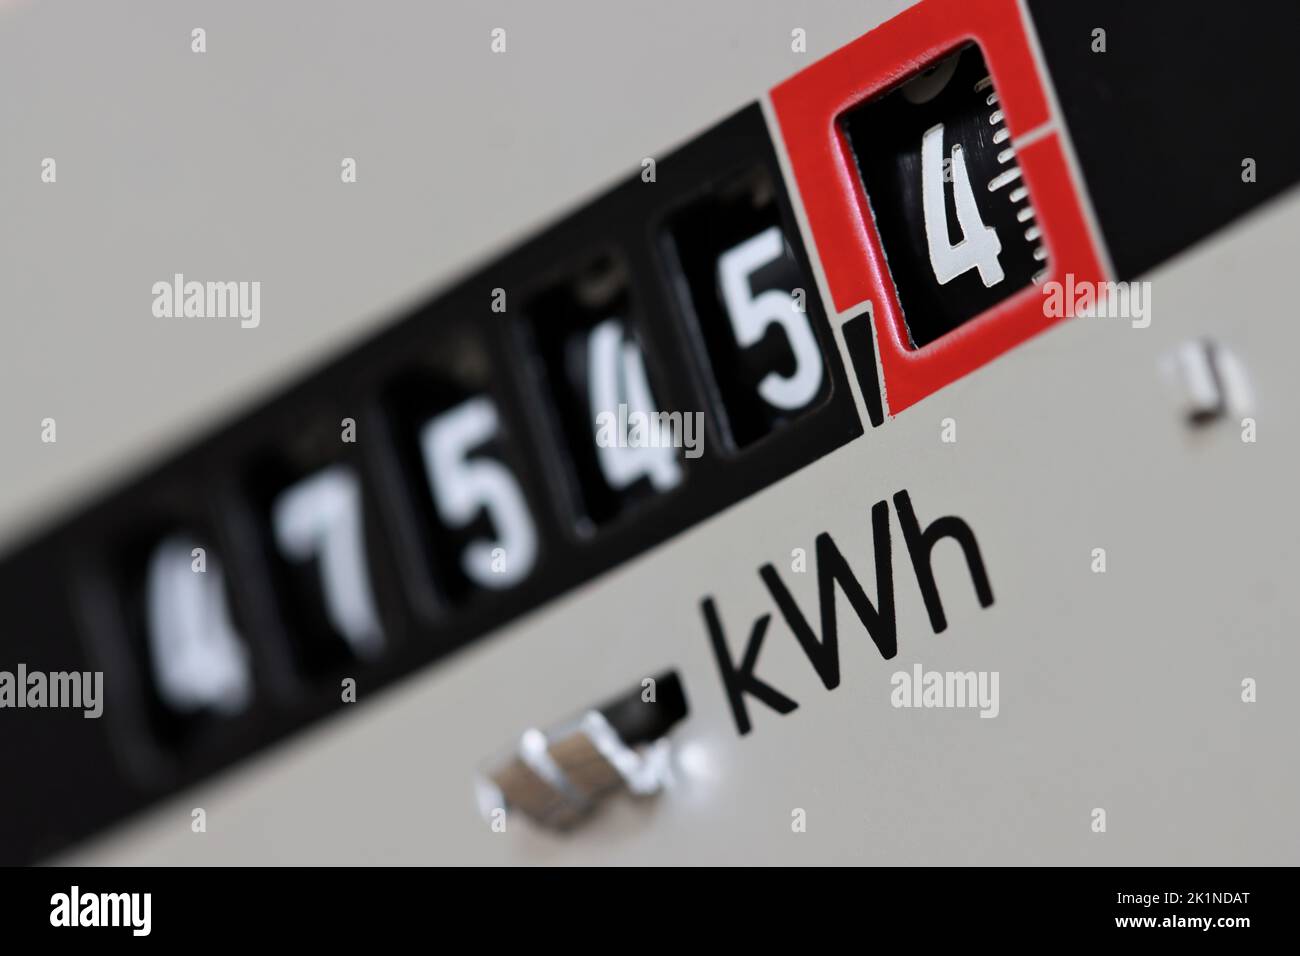 analogue electric meter in private household Stock Photo